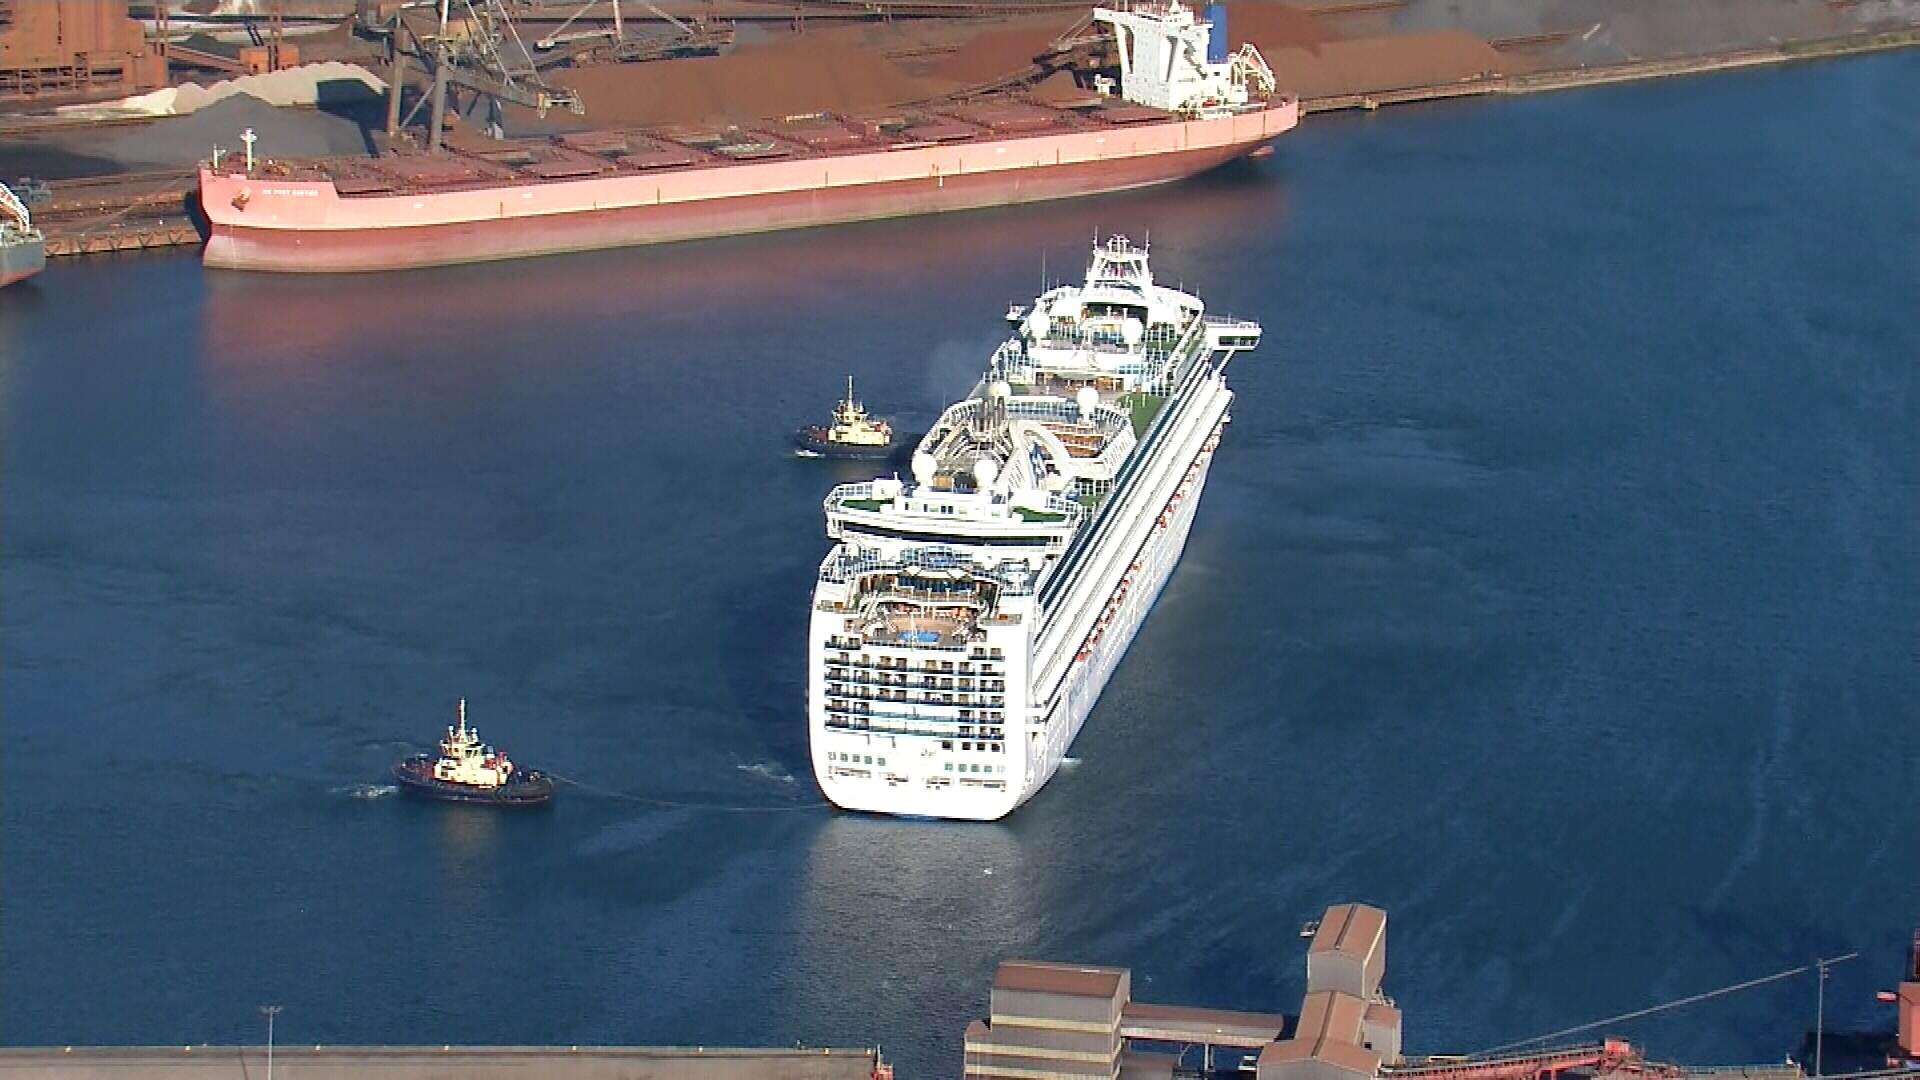 NSW Health said there were no identified COVID-19 cases aboard the Ruby Princess when it was allowed to dock in Sydney. But a chain of emails, obtained by 9News, showed the department knew about the risk of coronavirus aboard the cruise, which has become Australia's COVID-19 epicentre.